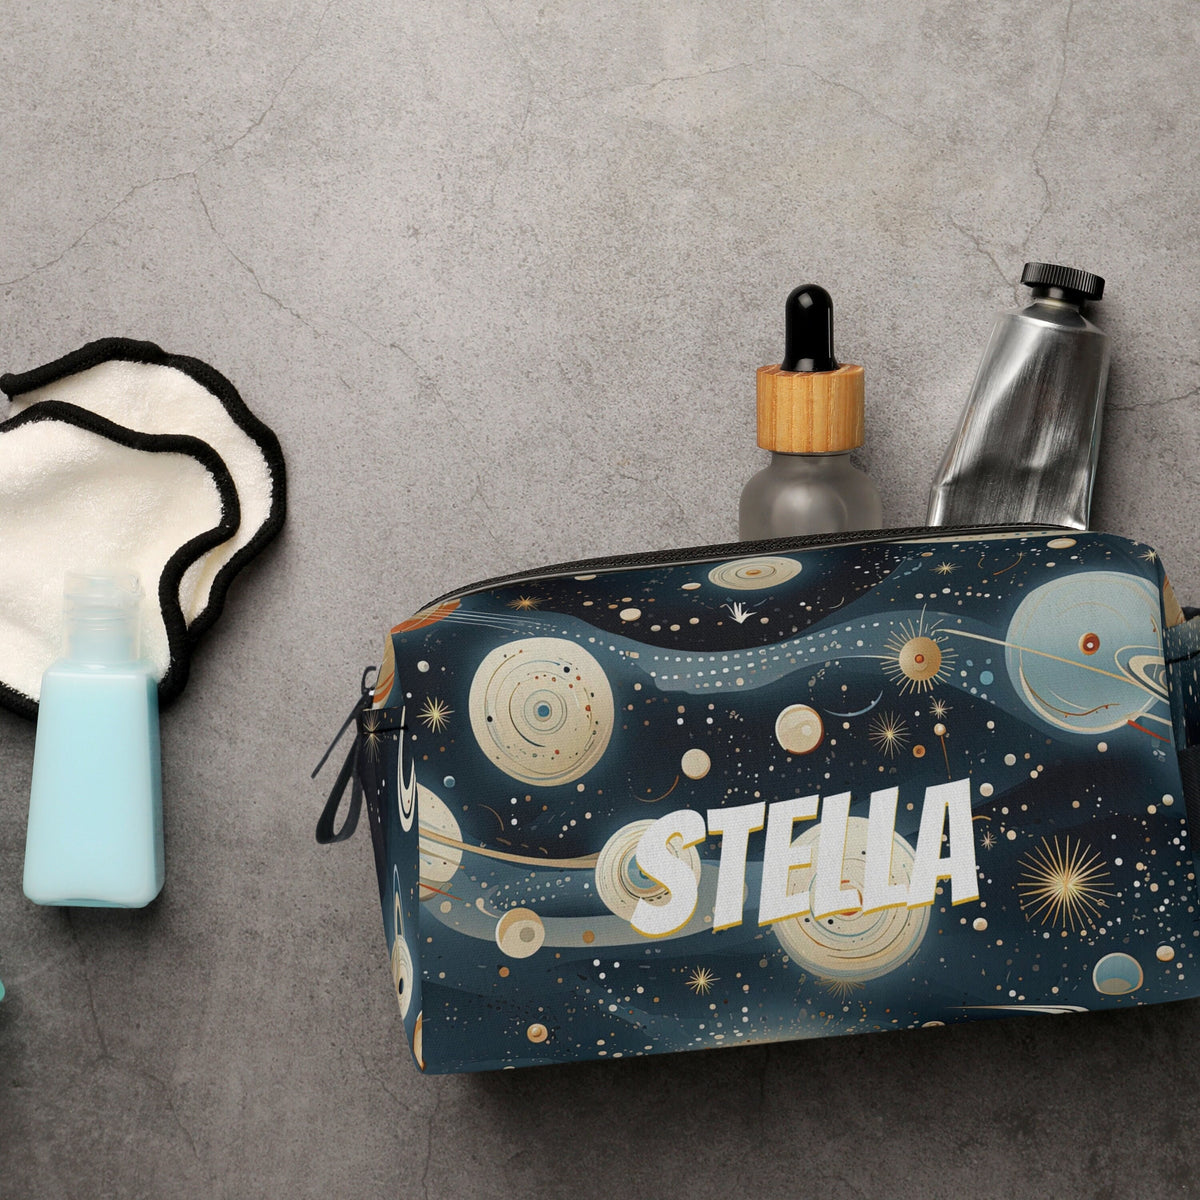 Personalized Toiletry Bag Personalized Kids Gifts Girl Travel Bag Custom Makeup Bag Galaxy Gifts Moon and Stars Custom Name Toiletry Bag